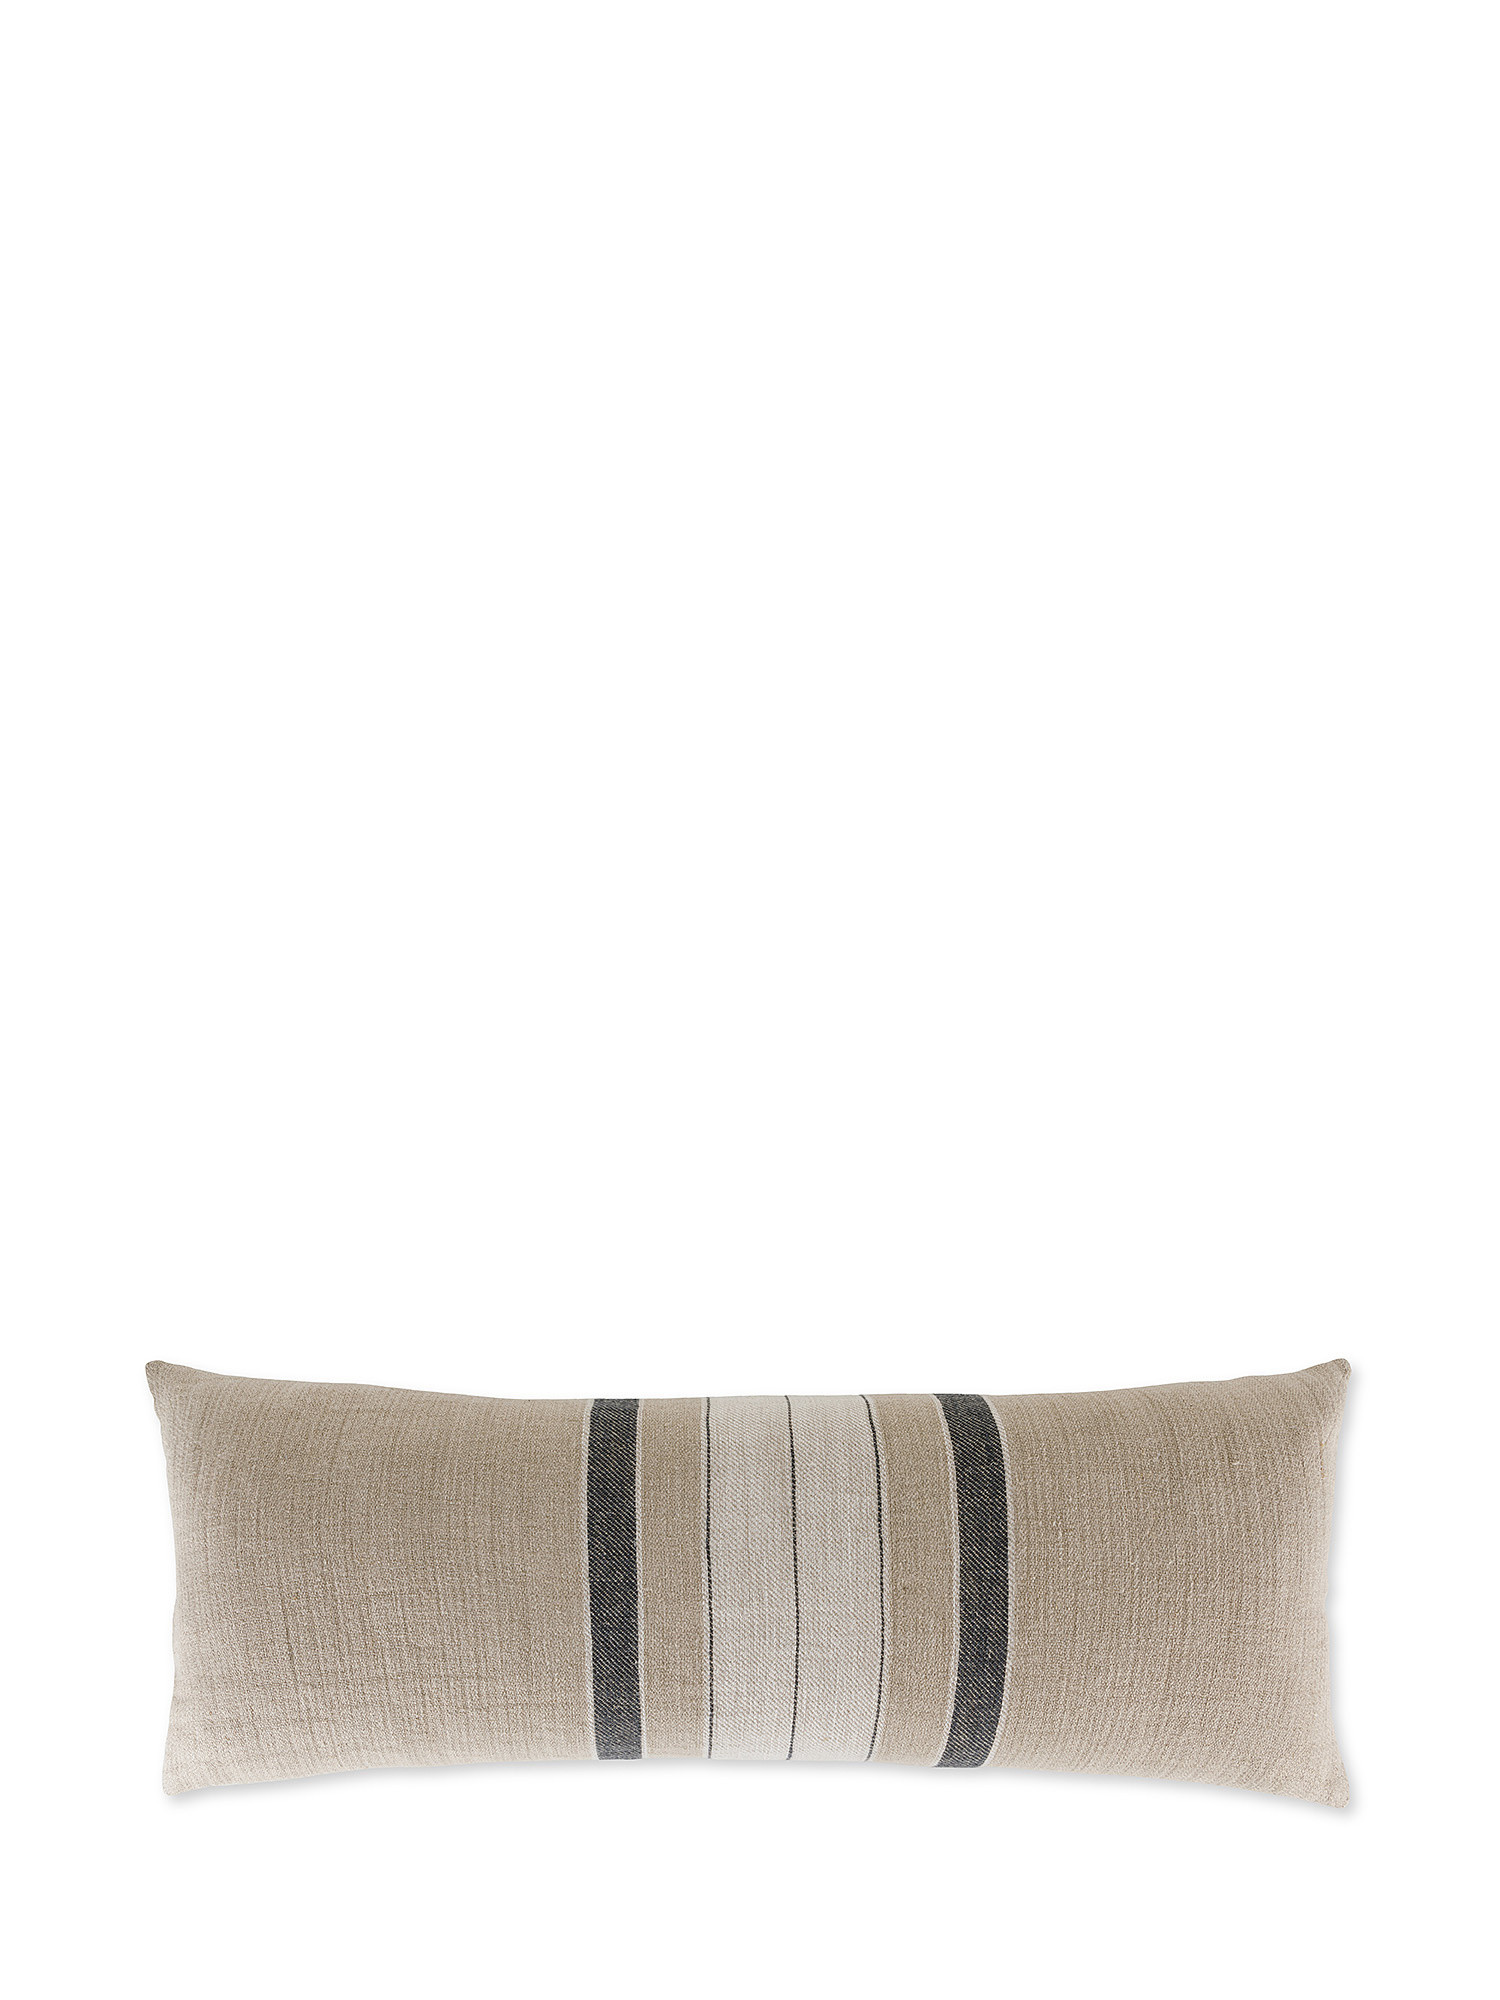 Yarn-dyed pure linen cushion 35x90cm, Beige, large image number 0